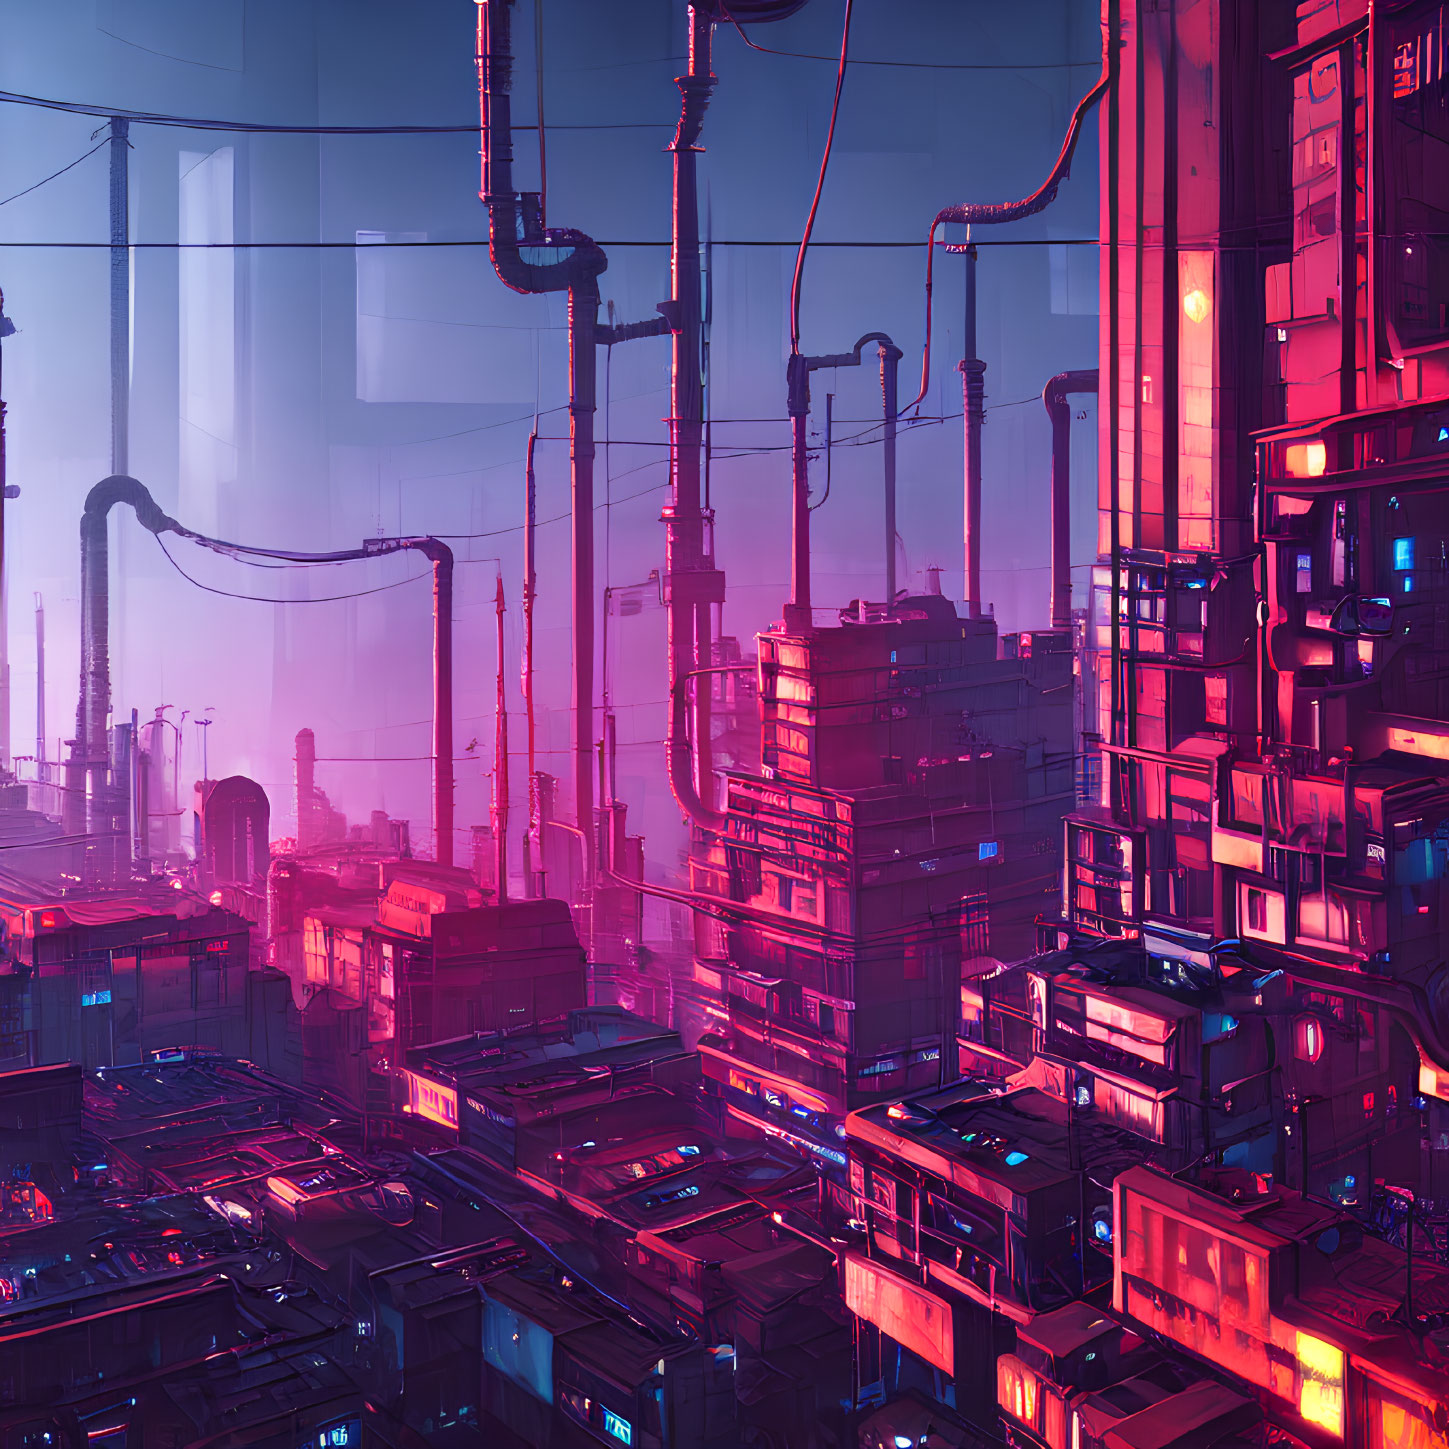 Futuristic cityscape with pink and blue hues, high-rises, and pipelines under hazy